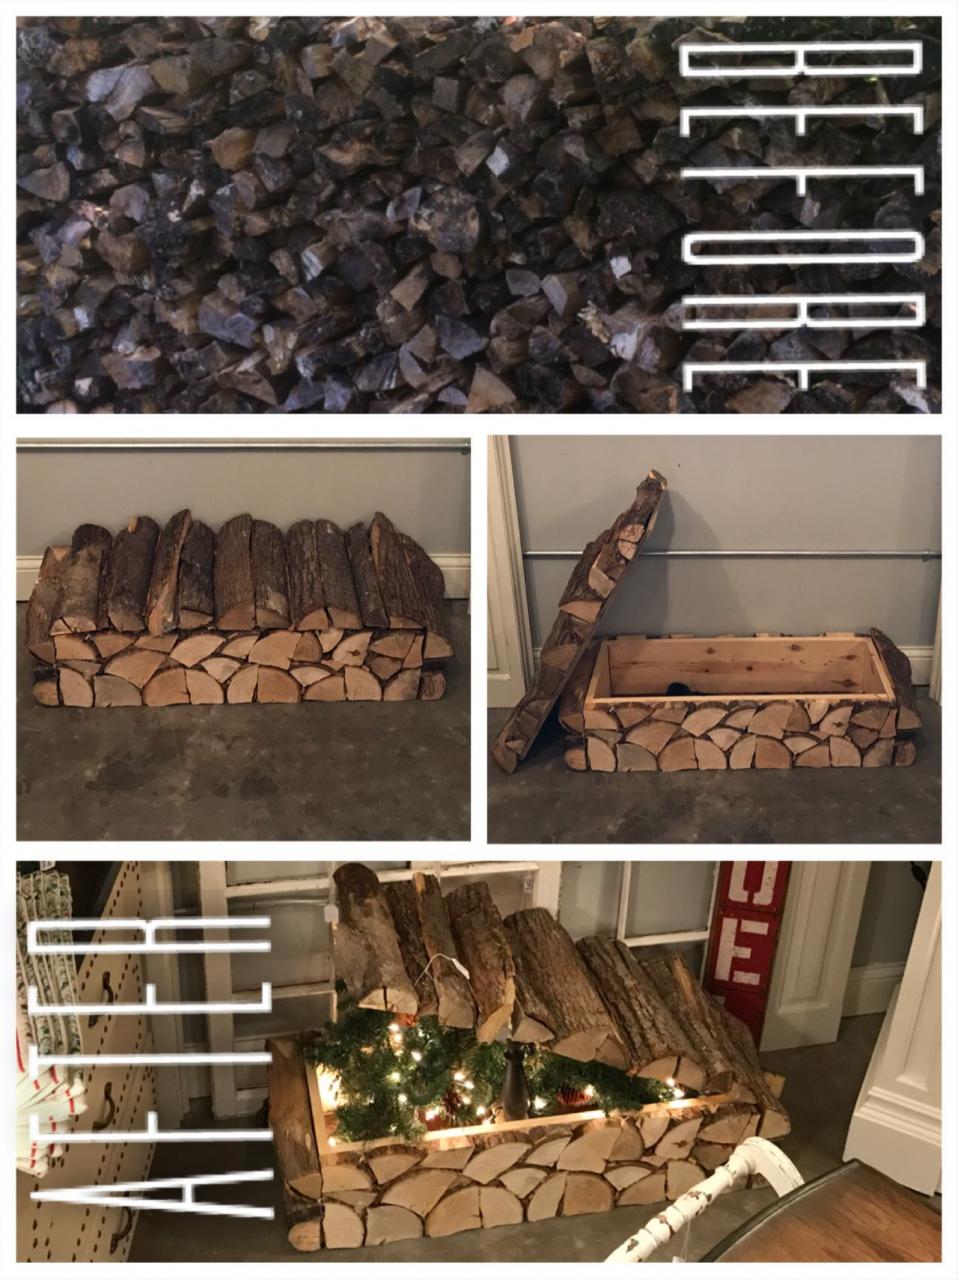 the steps are made out of wood and have christmas lights on them